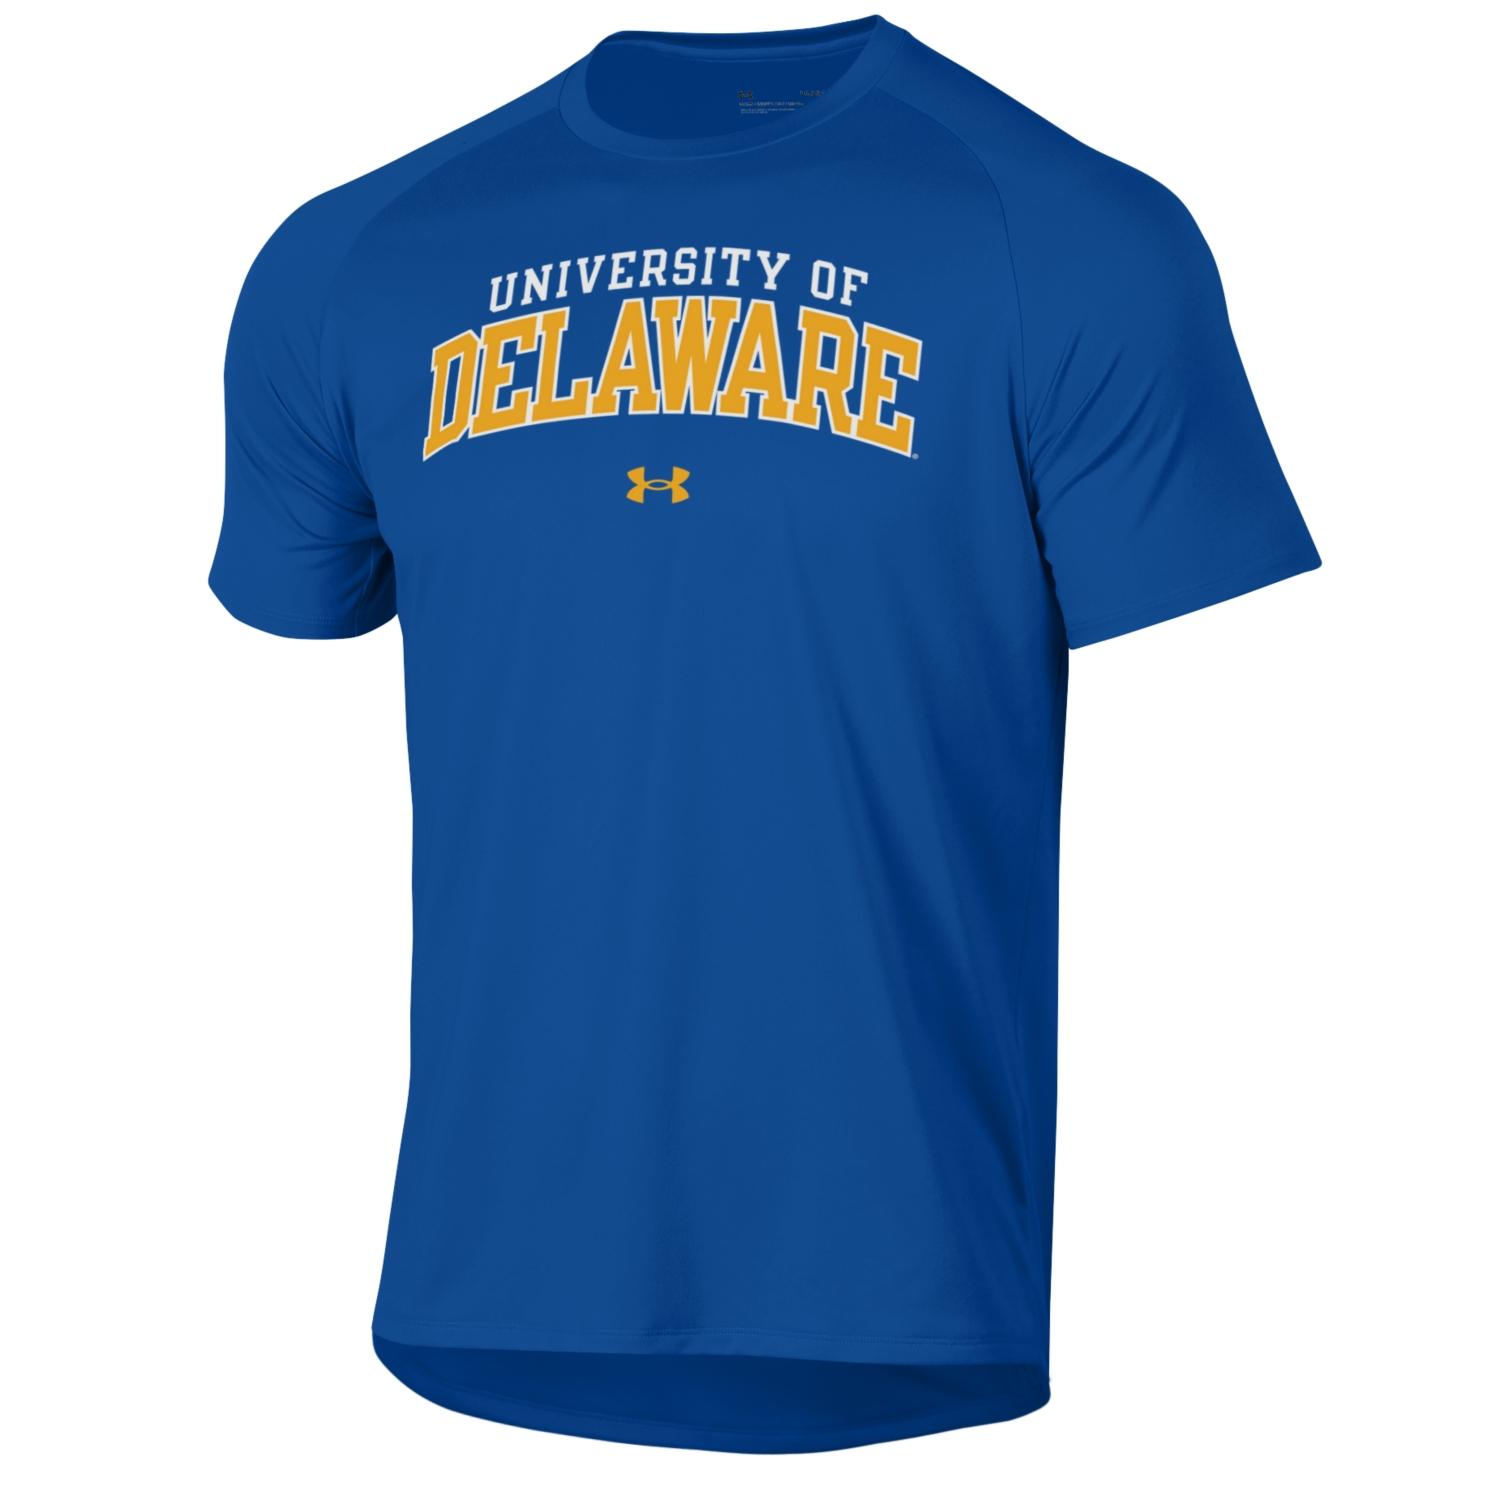 https://www.national5and10.com/wp-content/uploads/2020/05/University-of-Delaware-Mens-Under-Armour-2-Color-Performance-T-shirt.jpg